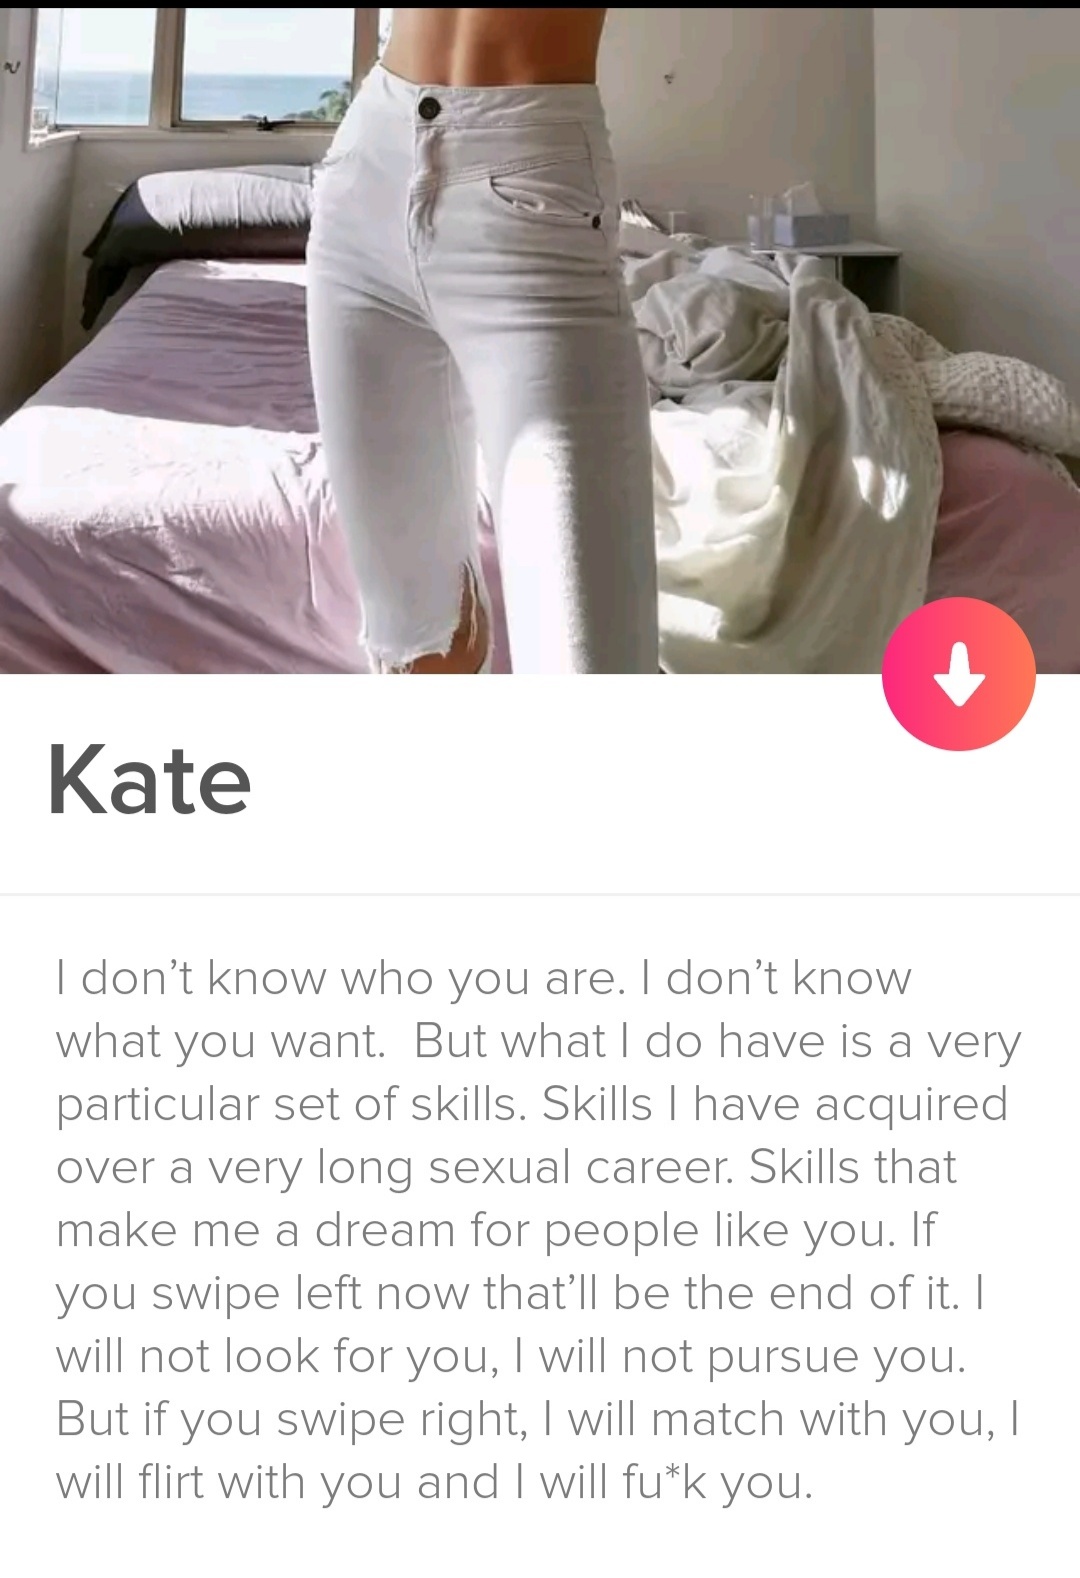 tinder wins and fails -Kate I don't know who you are. I don't know what you want. But what I do have is a very particular set of skills. Skills Thave acquired over a very long sexual career. Skills that make me a dream for people you. If you swipe left no